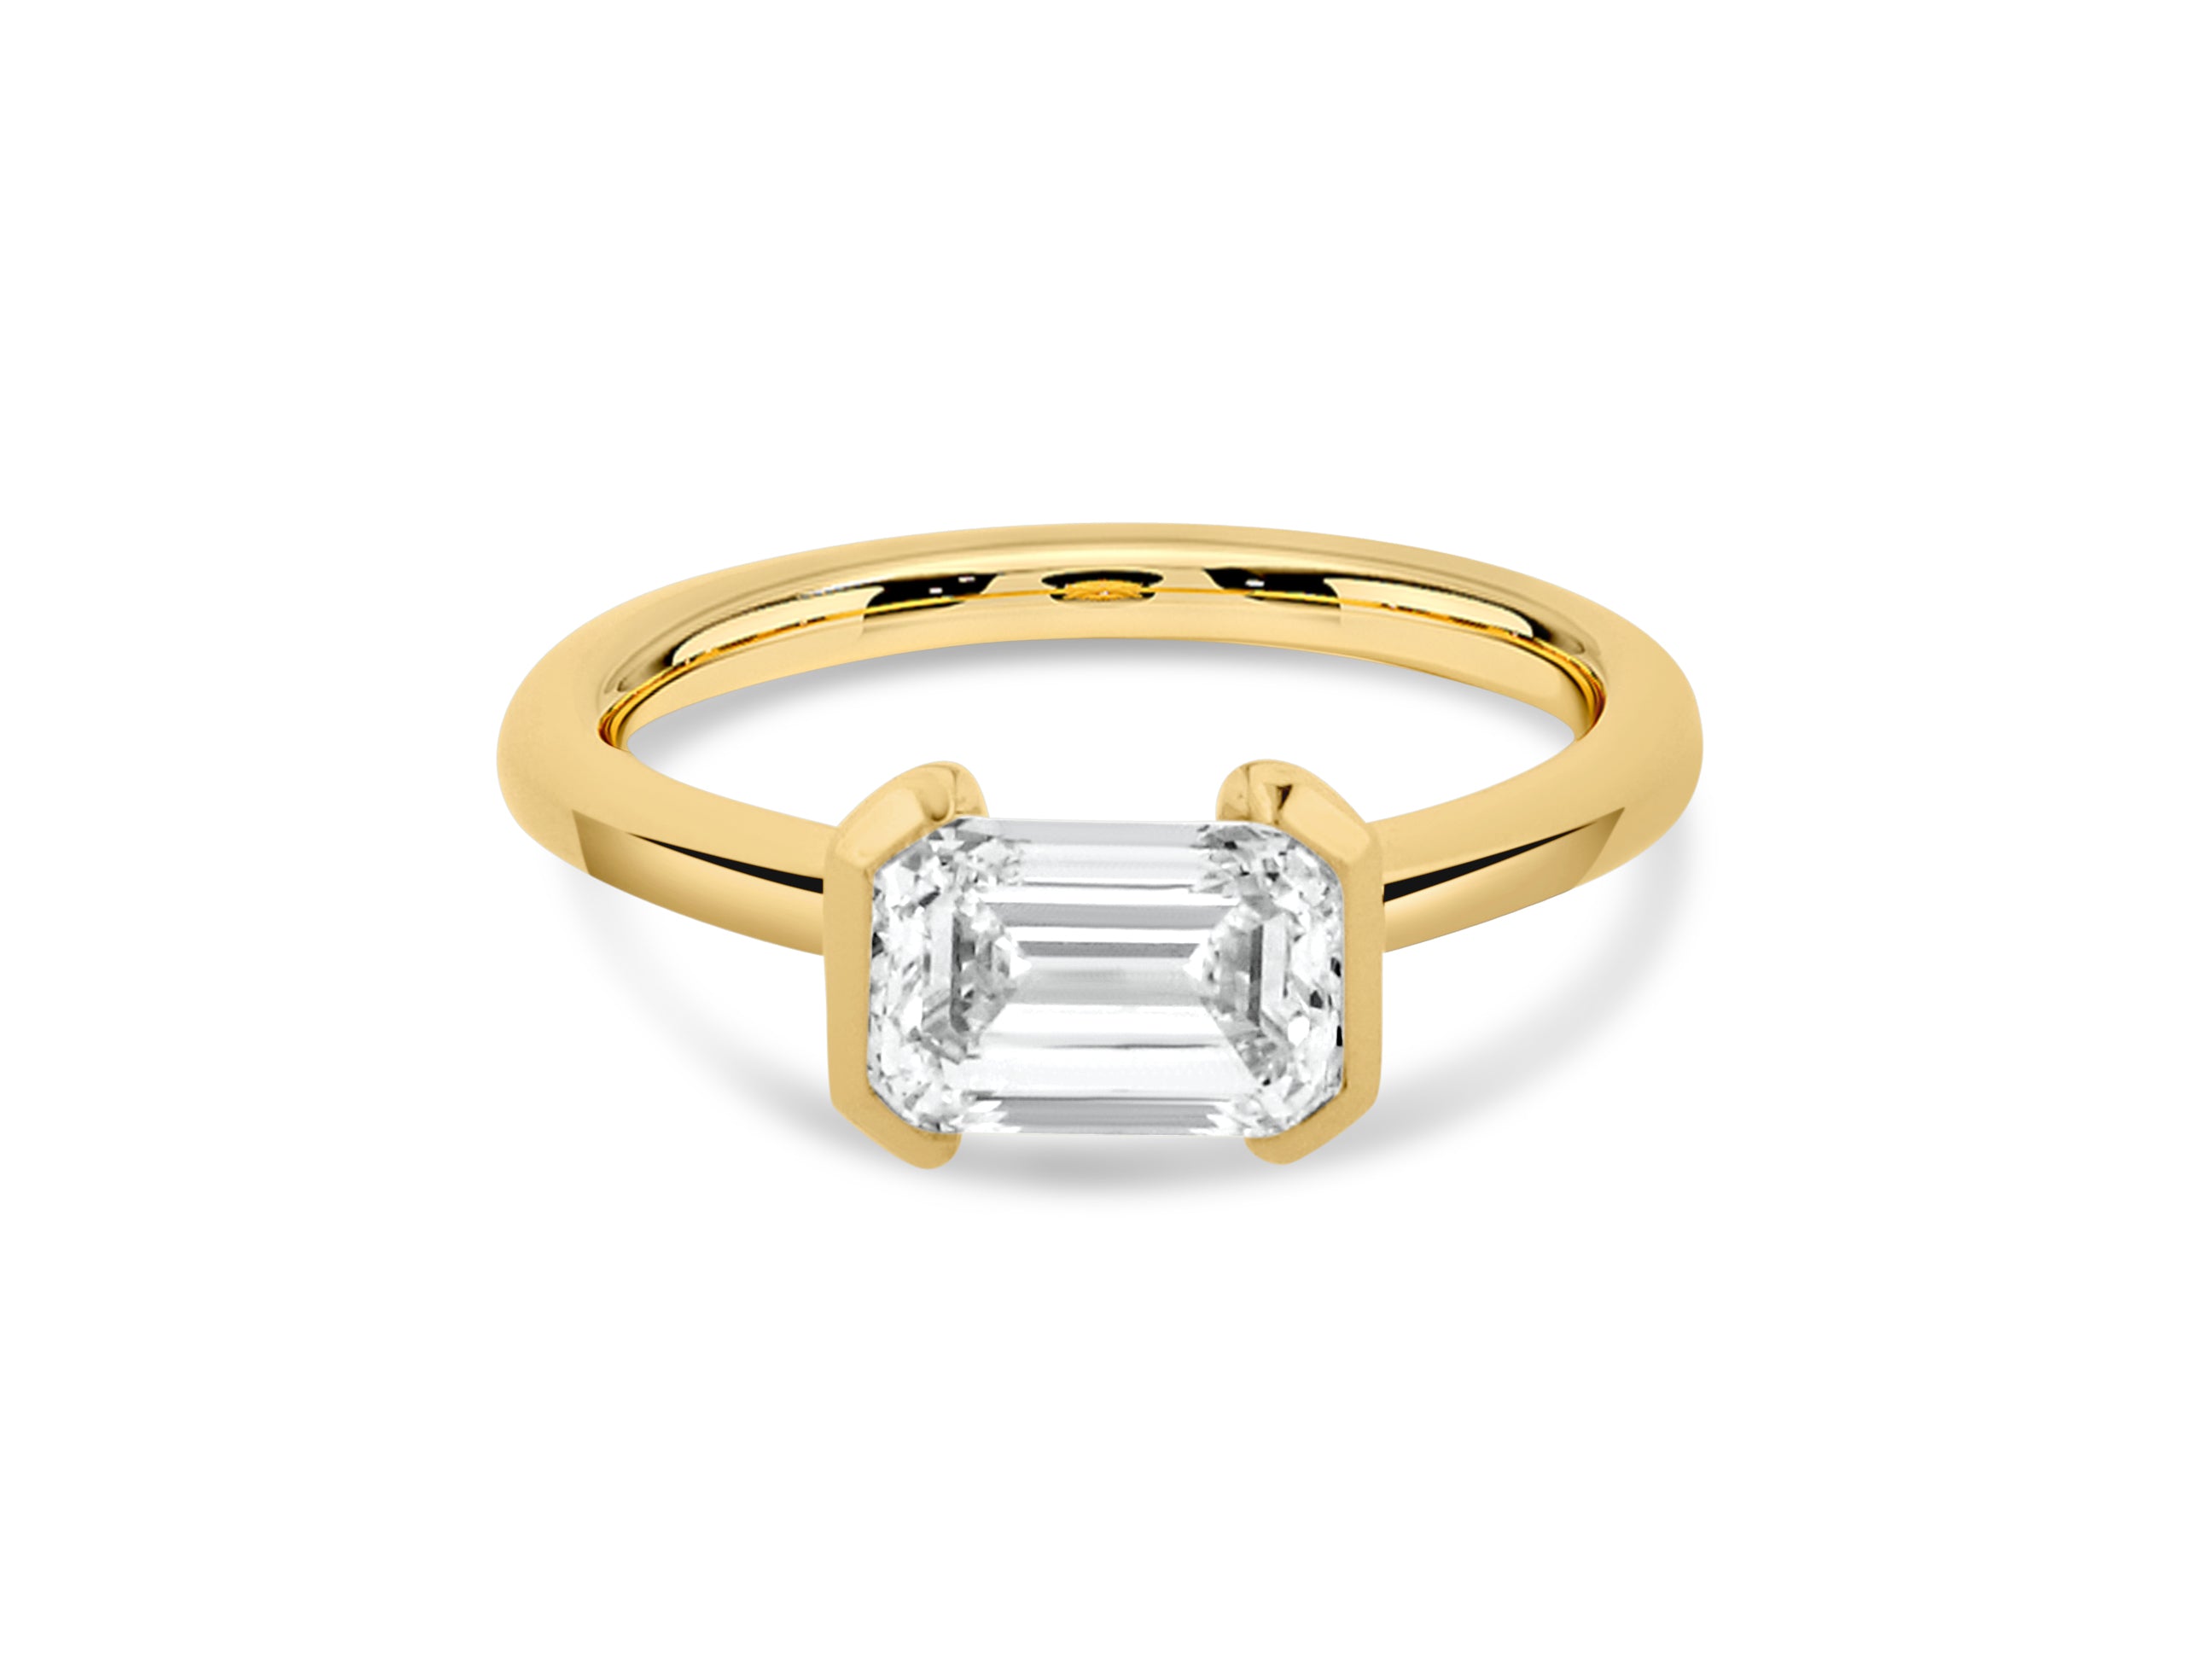 PRIVE' 18K YELLOW GOLD 1.56CT EMERALD CUT SWAROVSKI LAB GROWN DIAMOND.  CERTIFIED AND EXCELLENT CUT